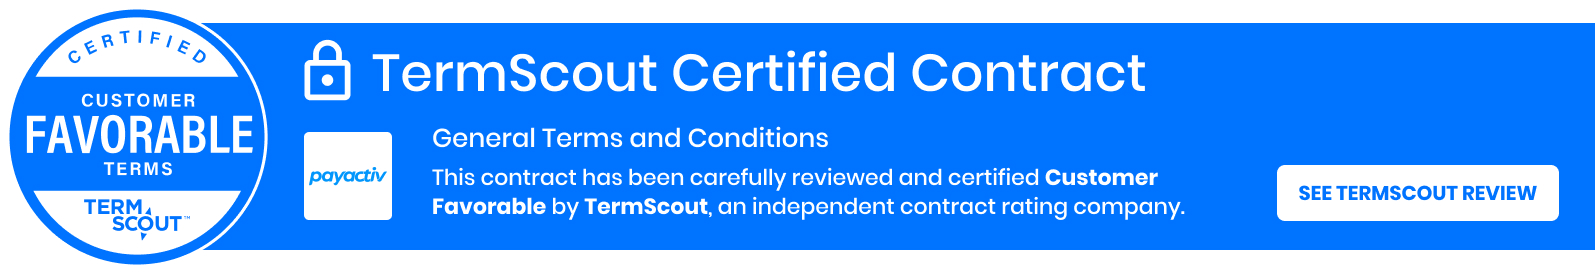 TermScout Certification